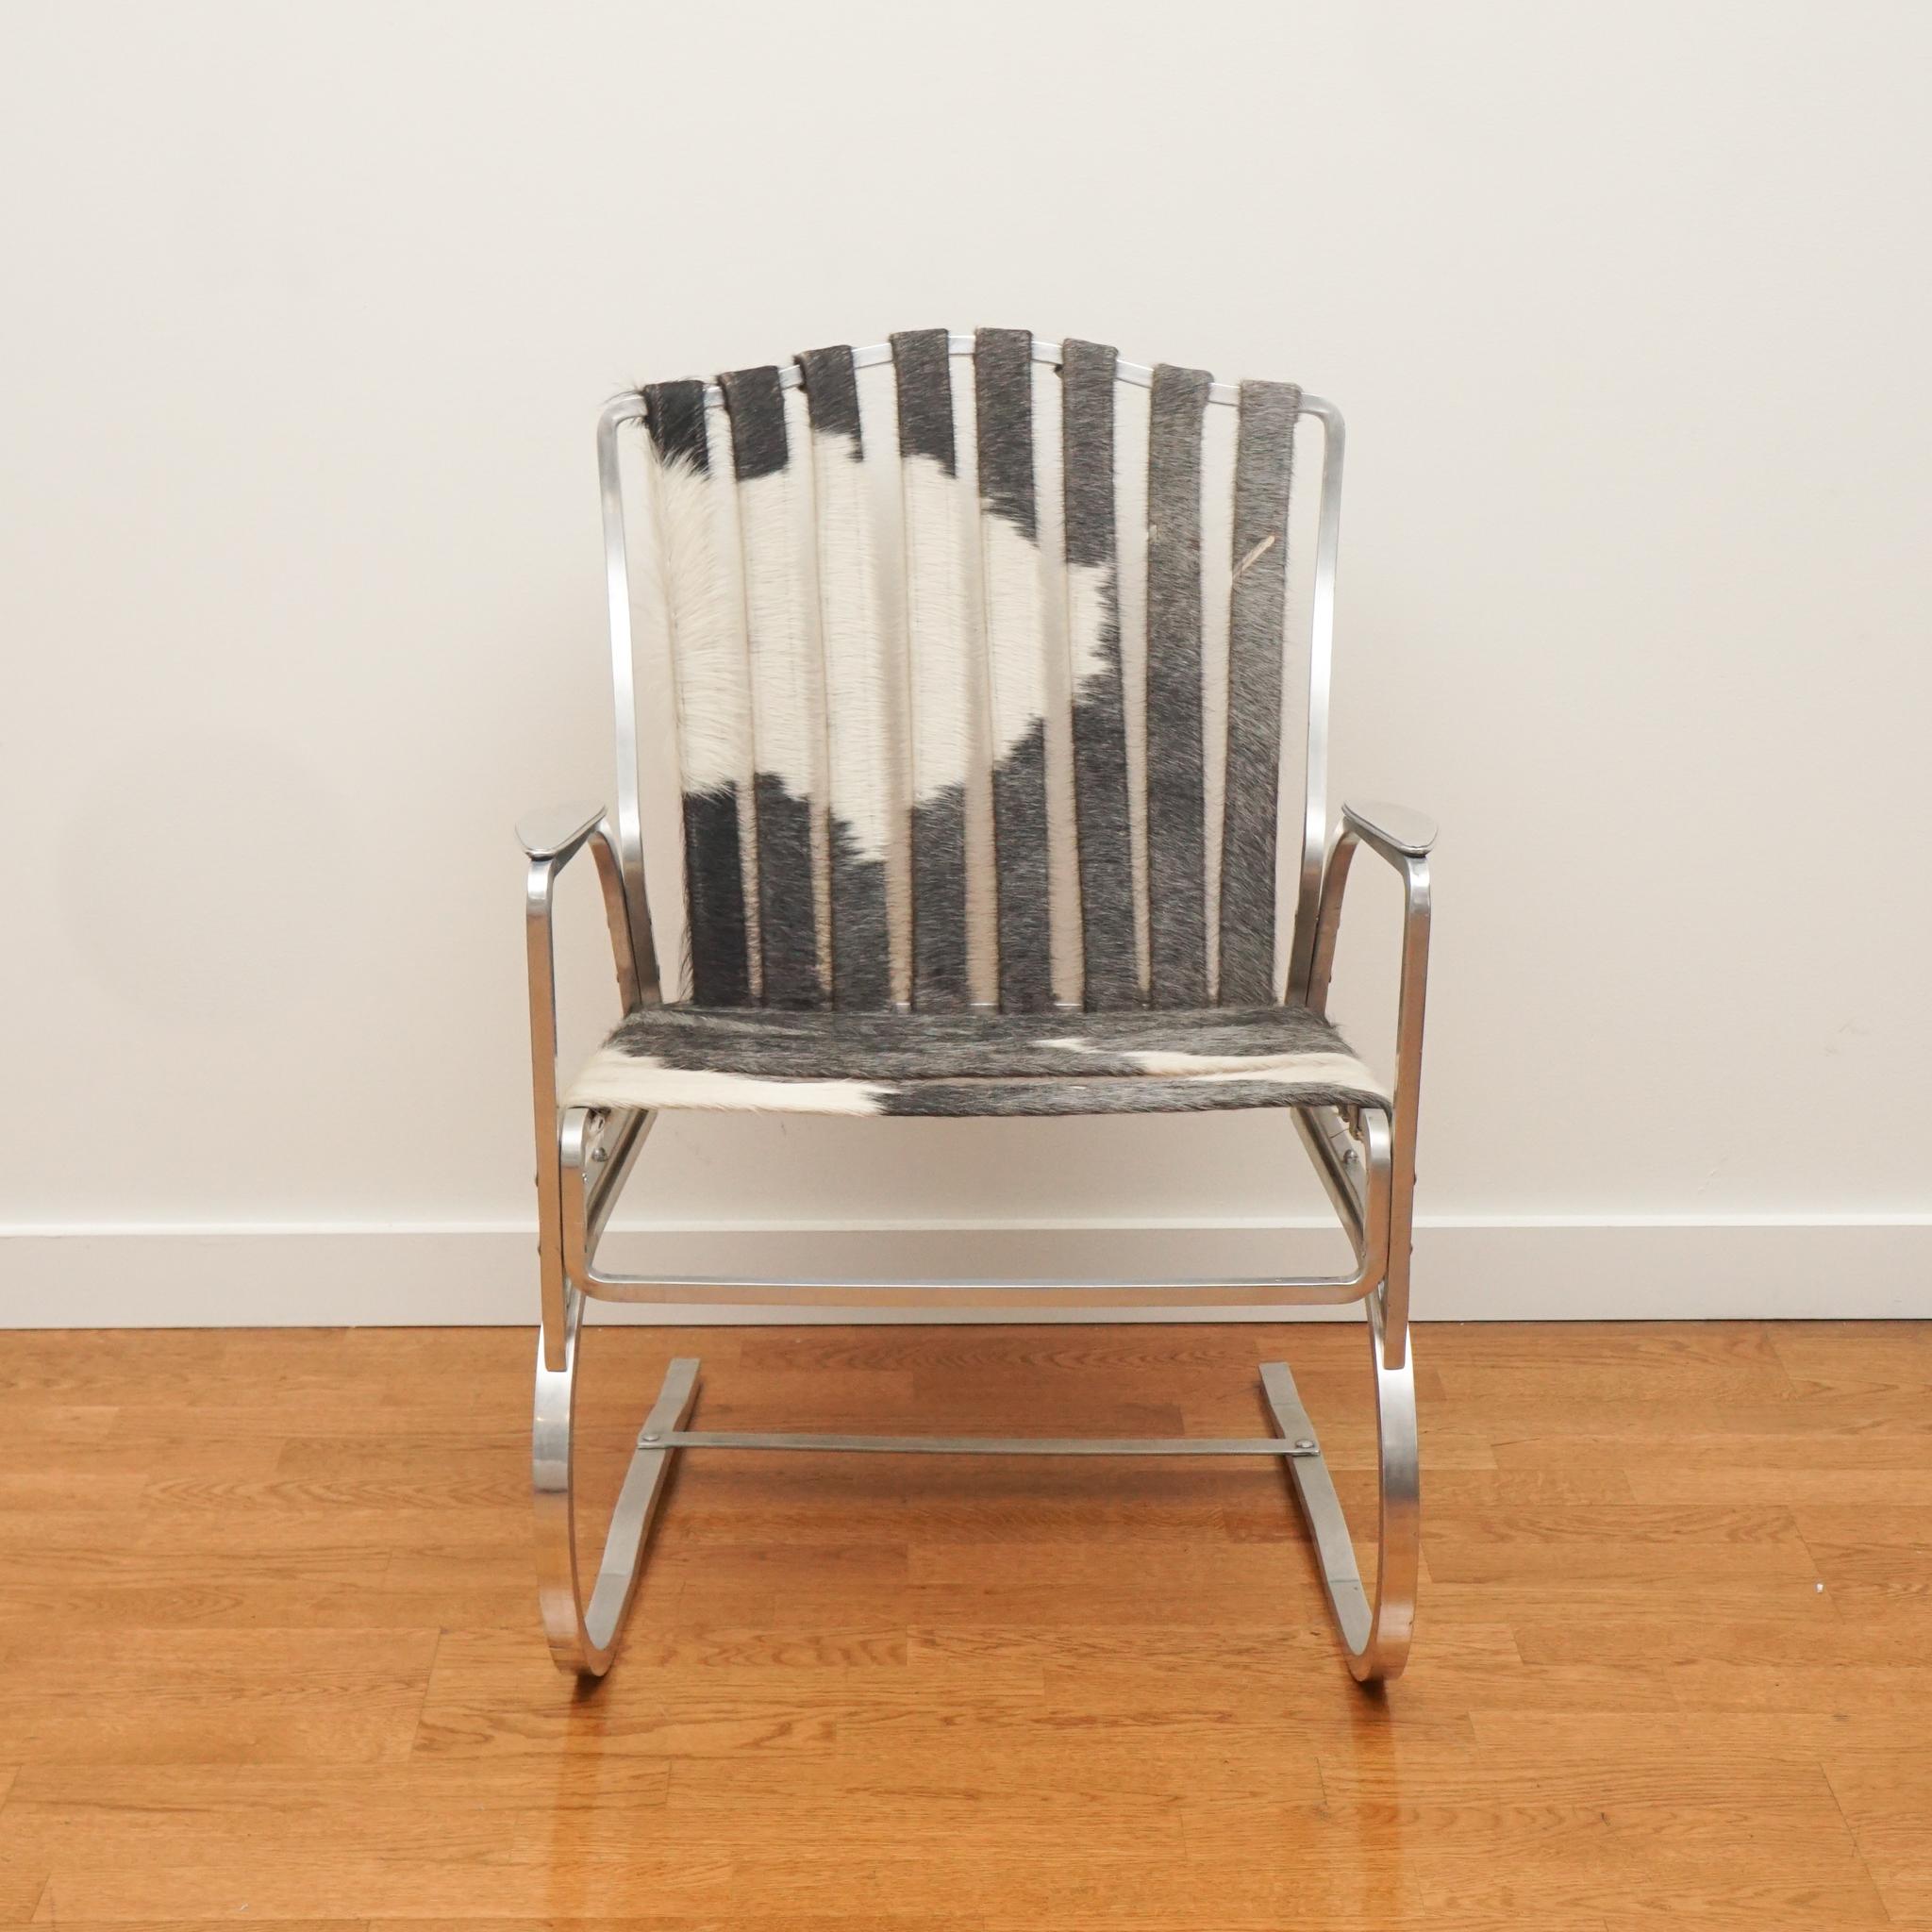 The aluminum armchair with cowhide straps, shown here, is from the 1950s. Despite its age the chair is in very good condition—from the aluminum frame to the cowhide straps which are original to the chair. If you're looking for some retro chic, this